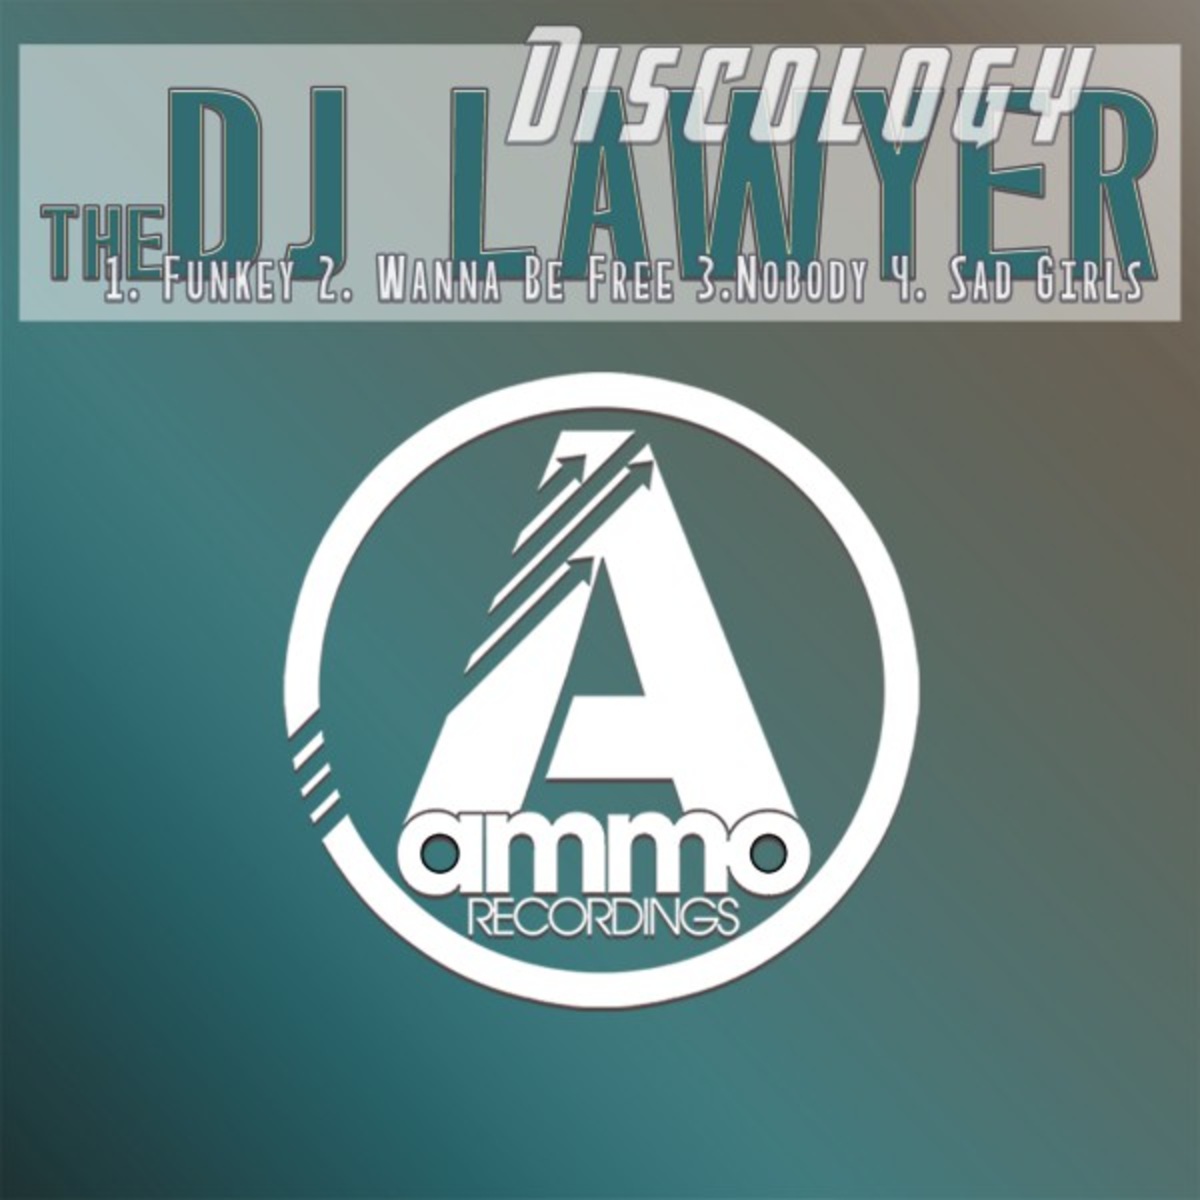 TheDJLawyer - Discology / Ammo Recordings